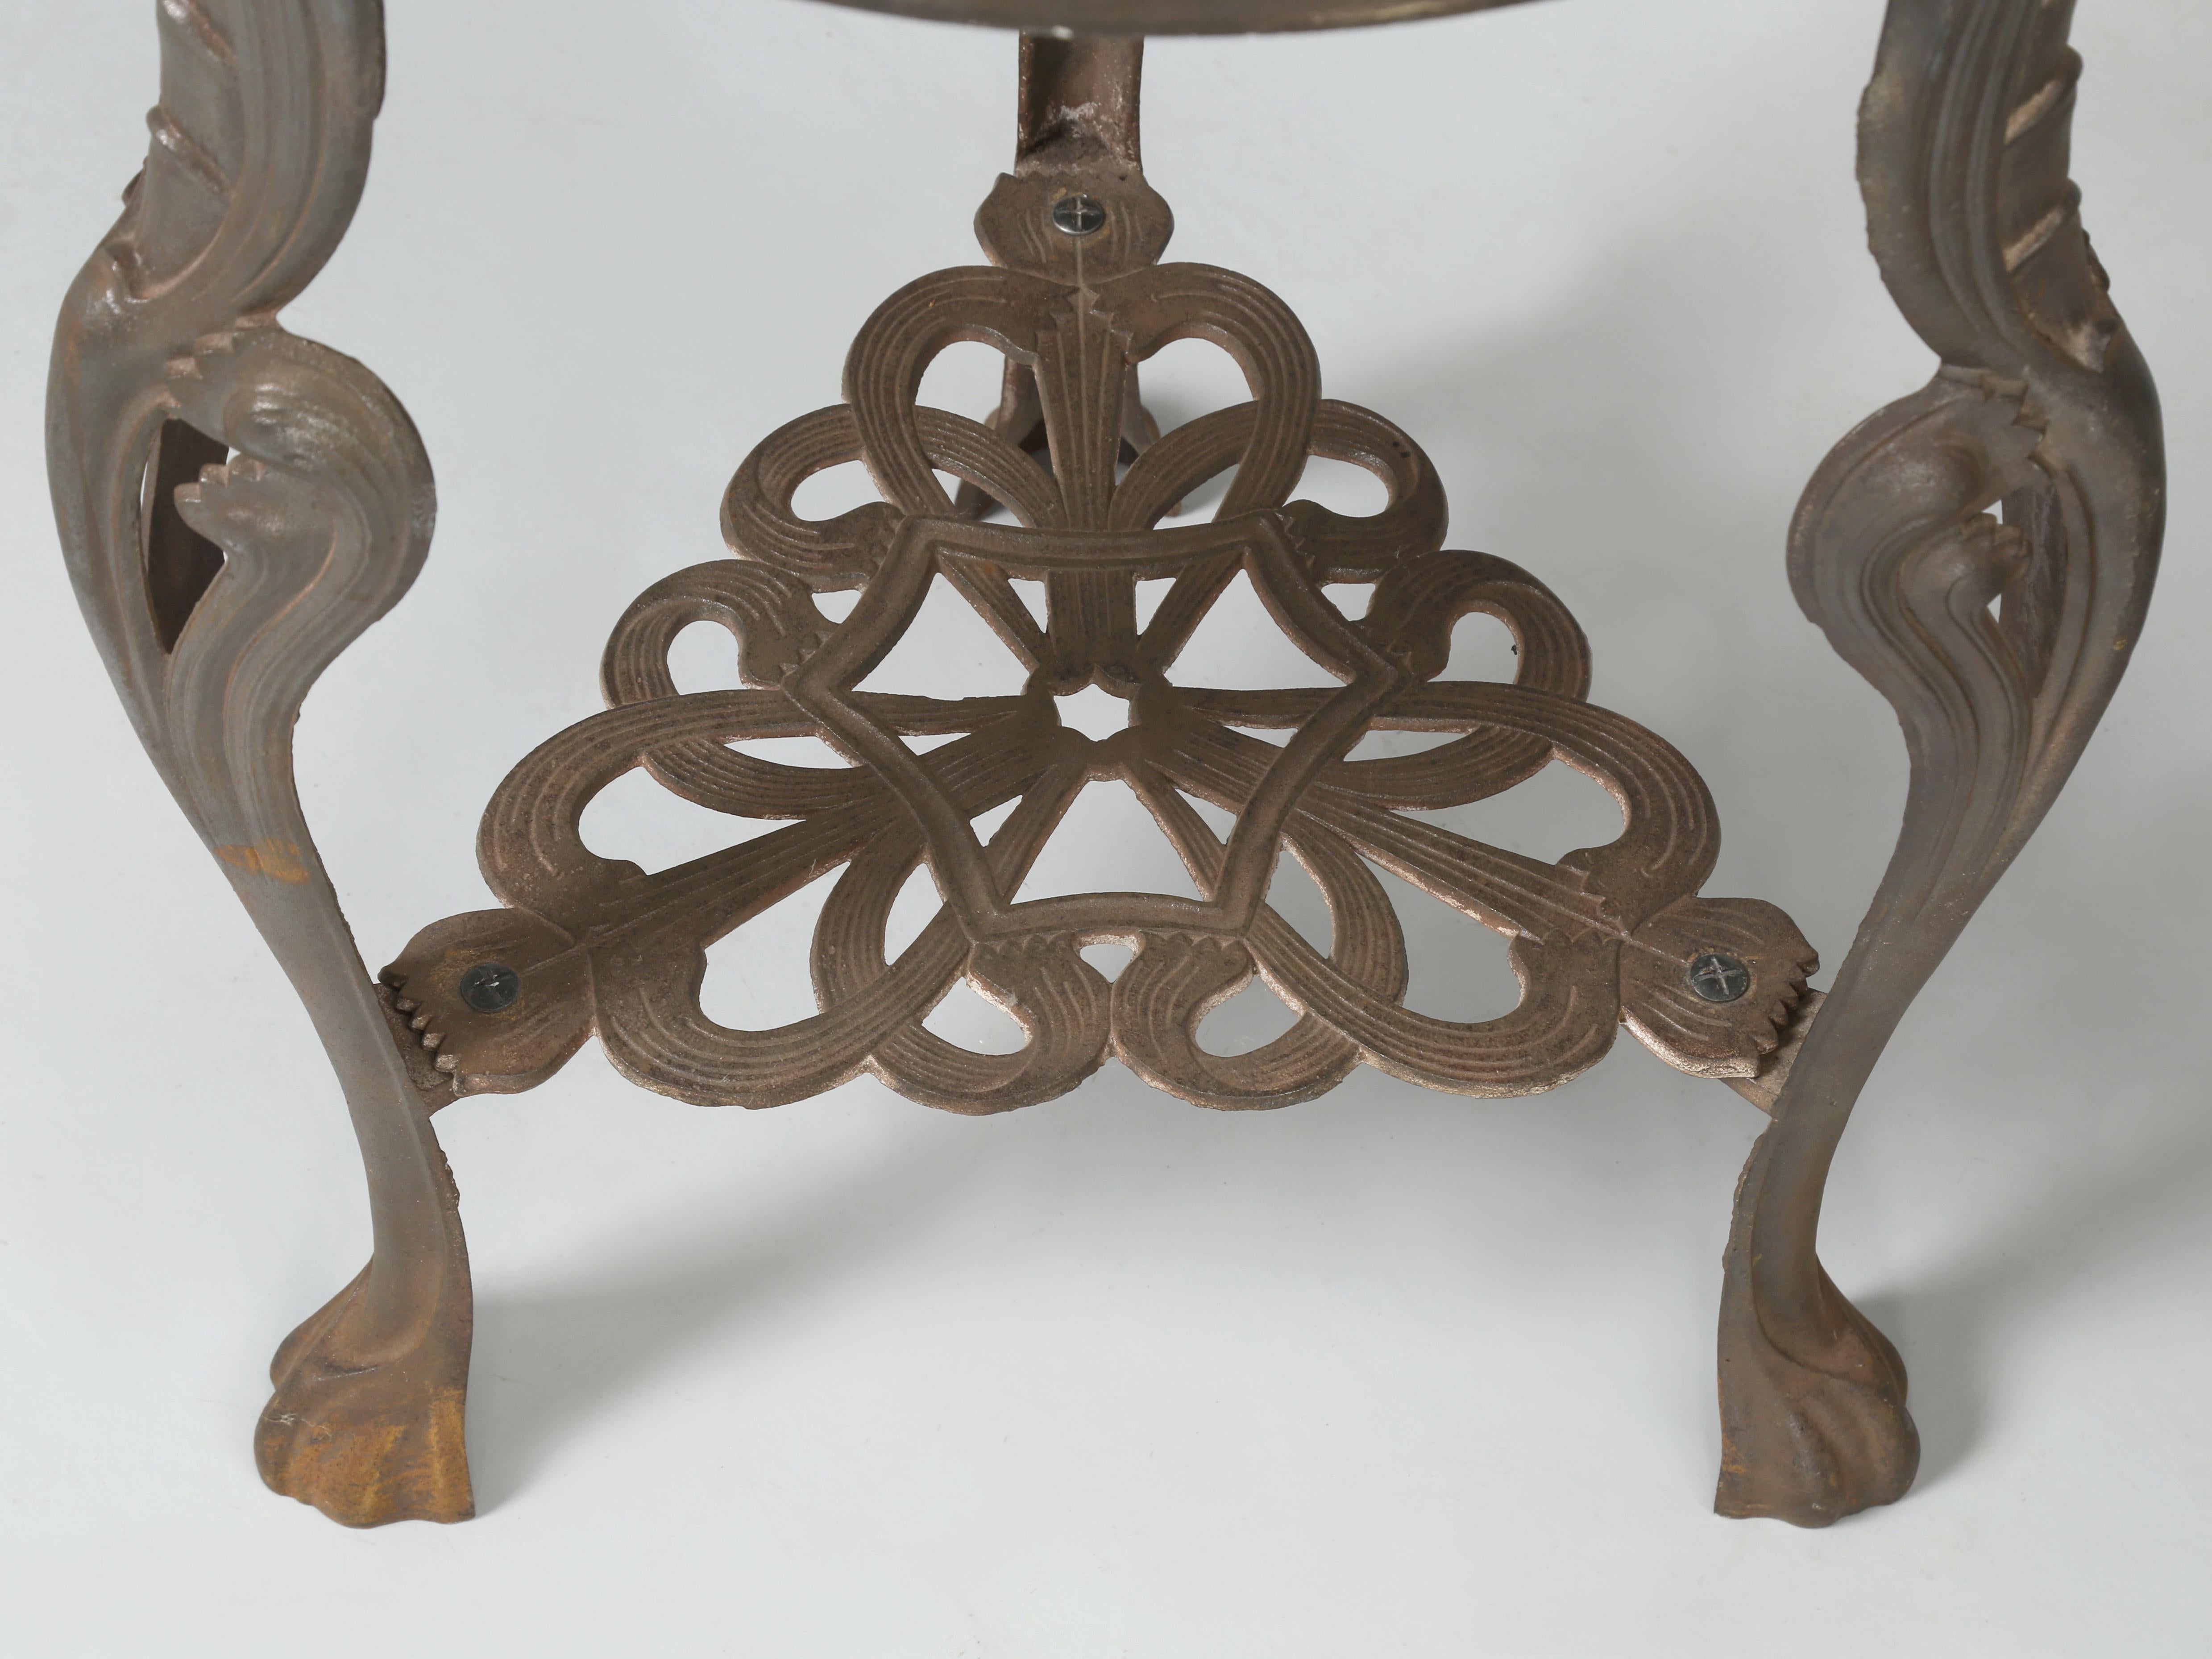 Near Pair of French Art Nouveau Guéridon Cast Iron Tables with Stone Tops For Sale 7